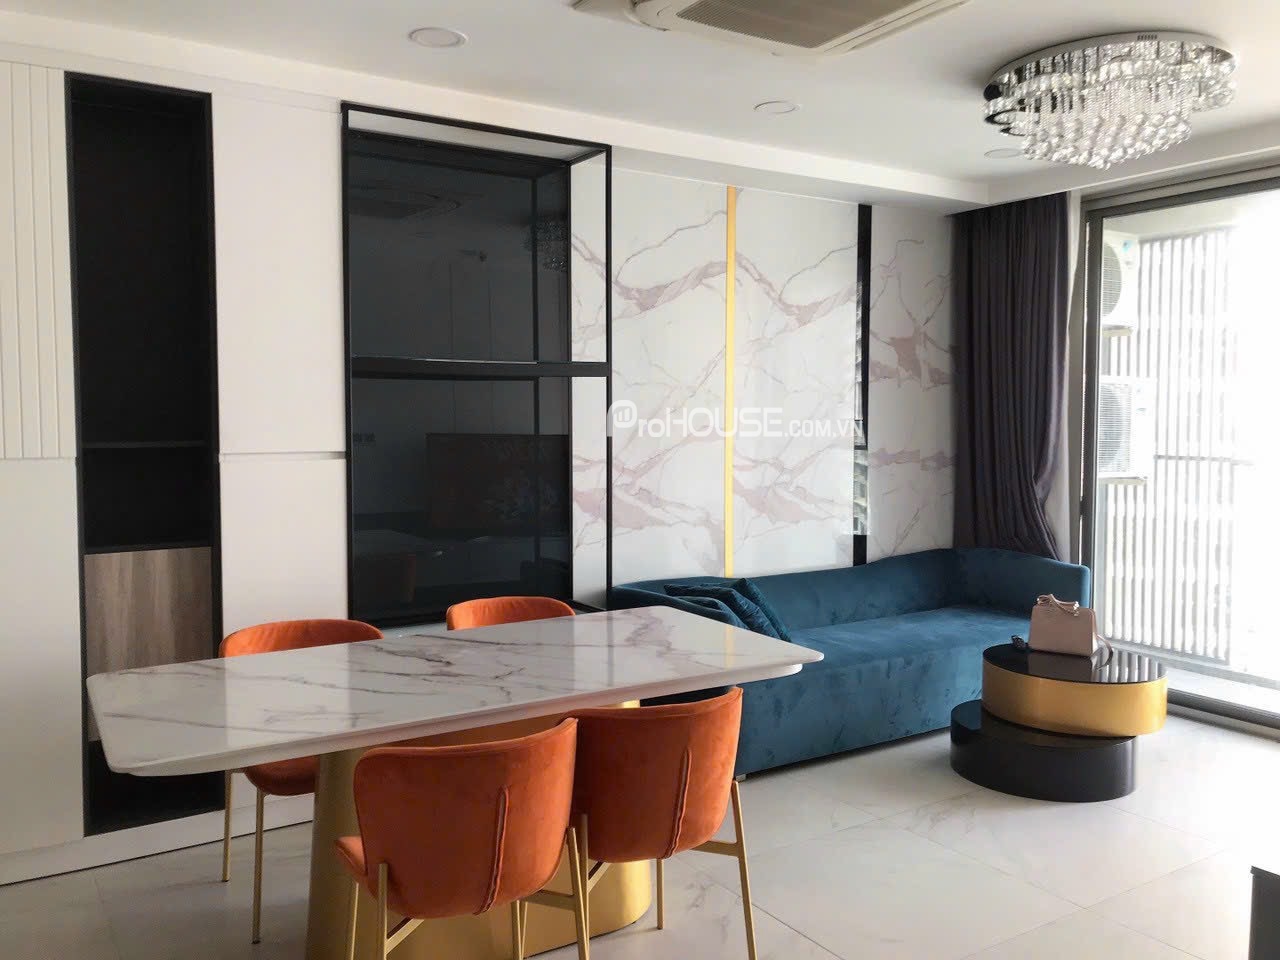 Luxury 2 bedroom apartment for rent at The Signature with full furniture